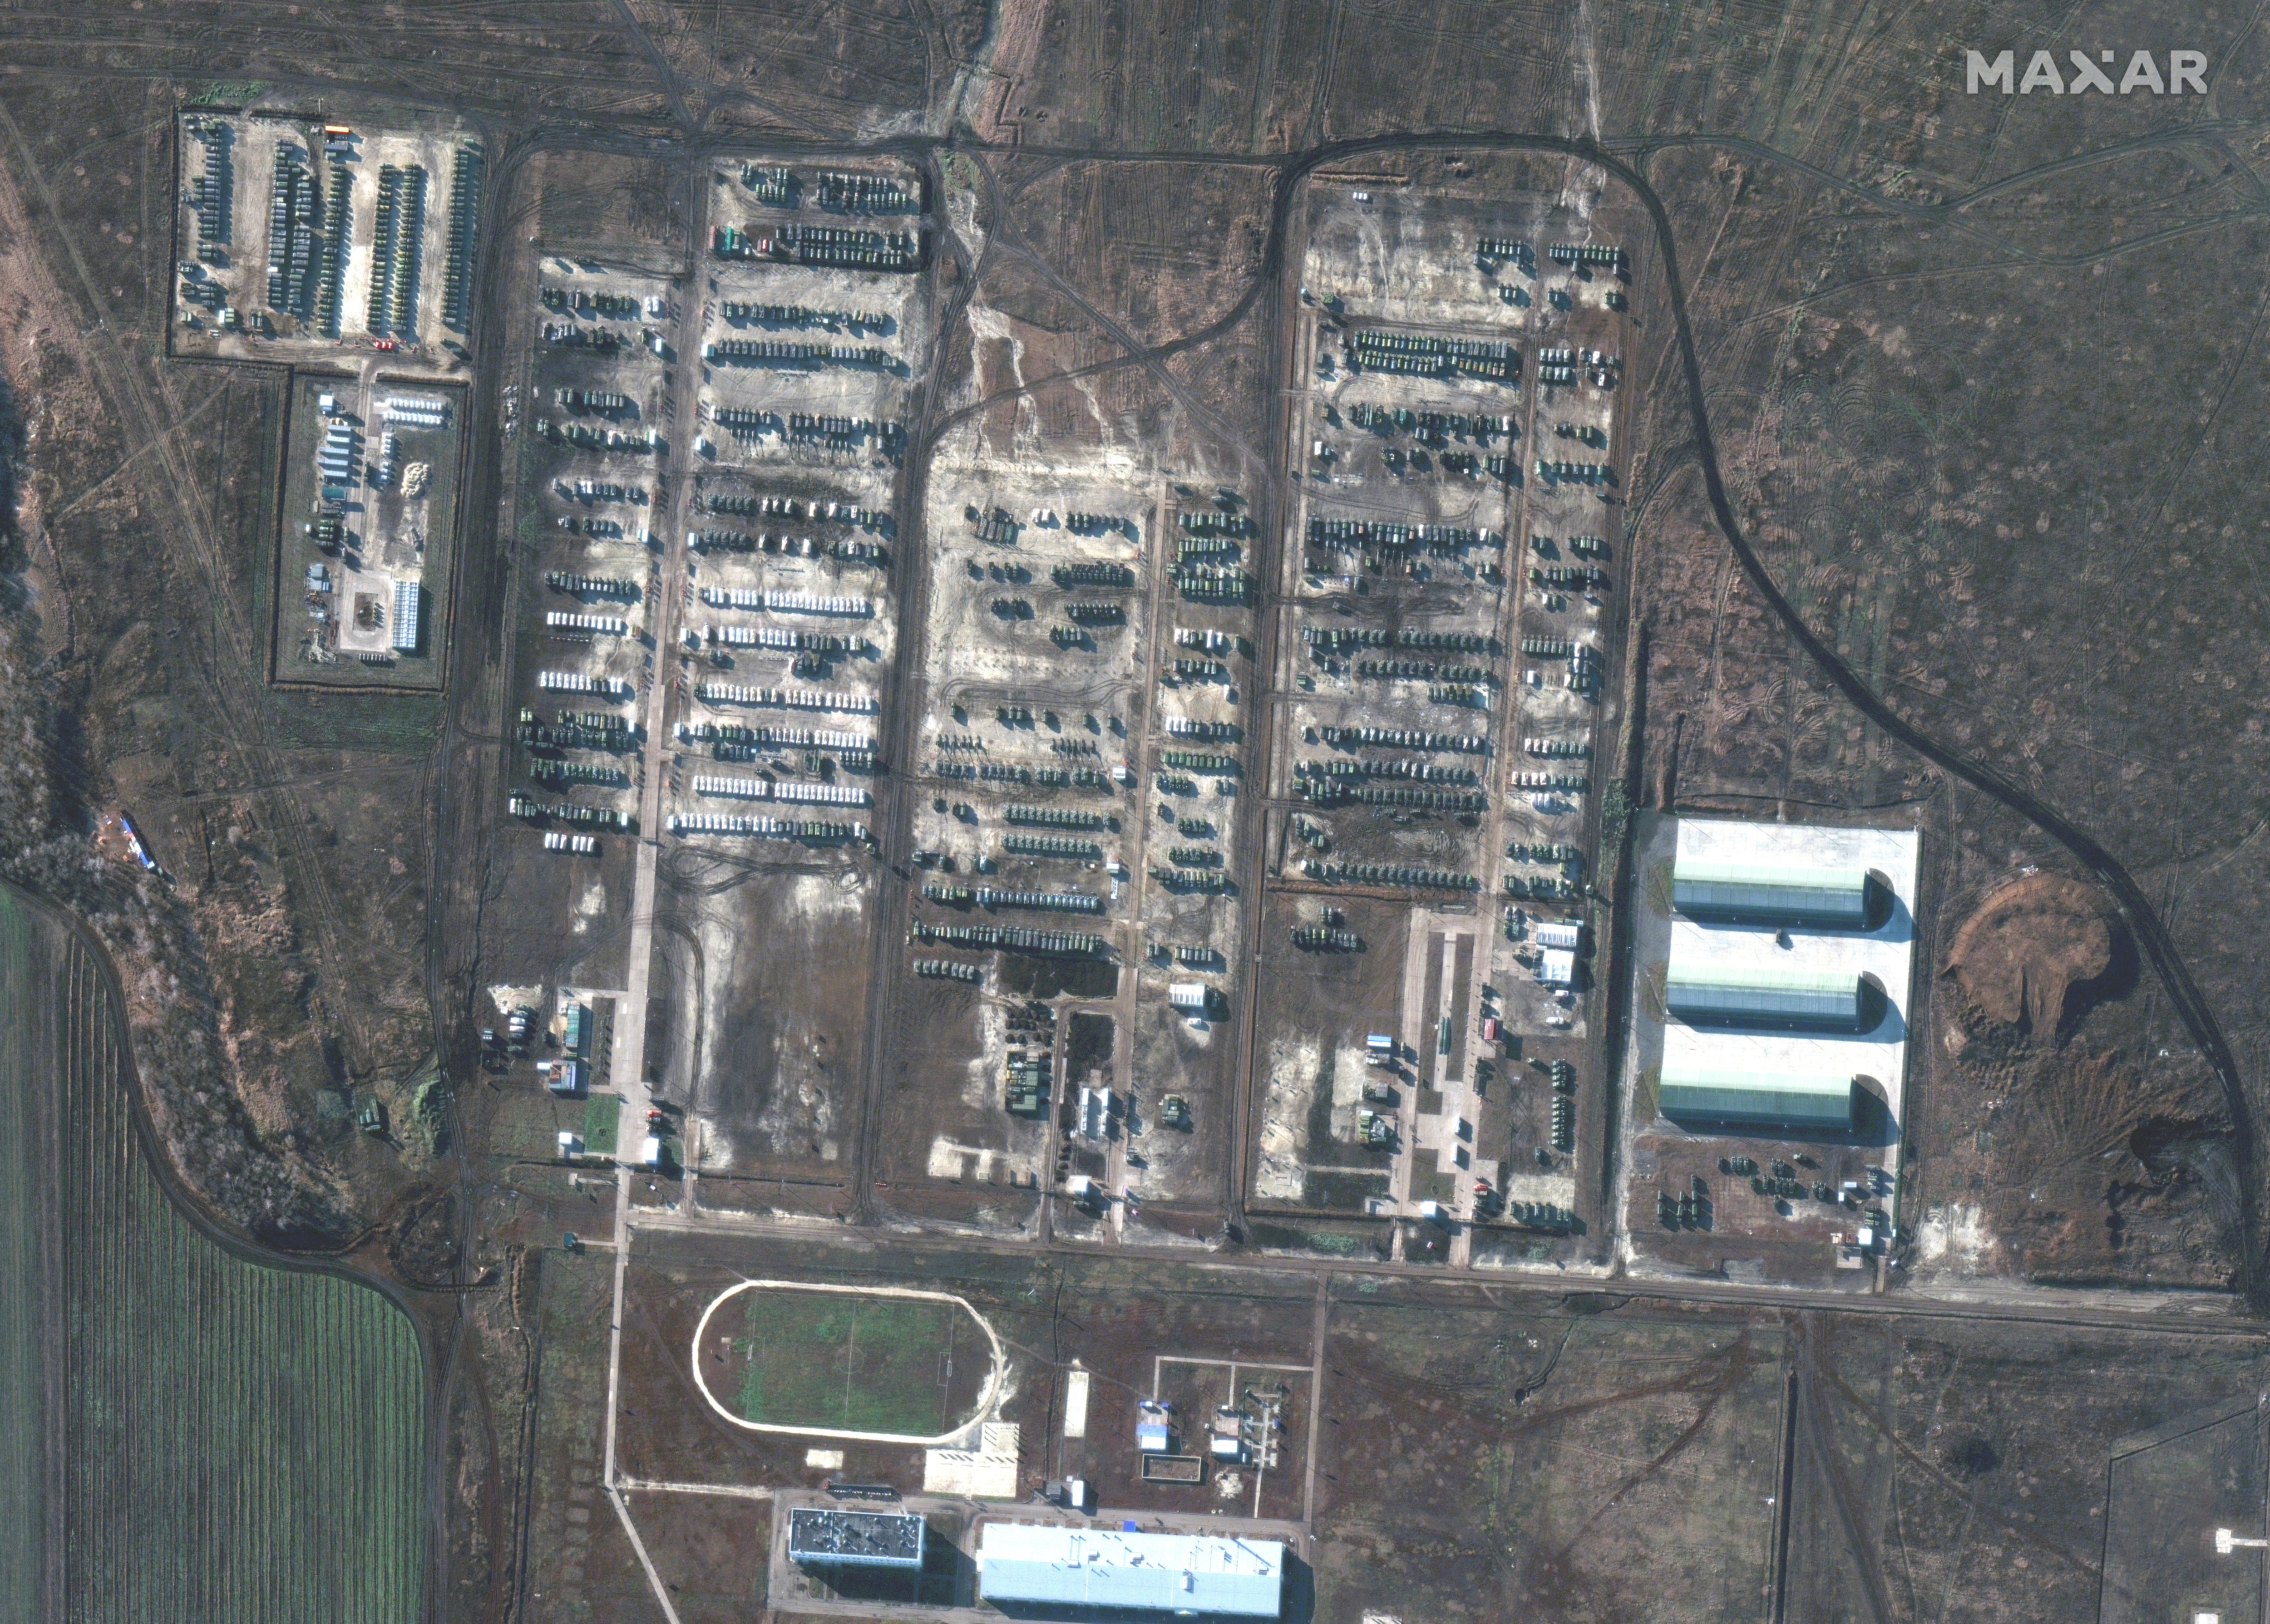 A satellite image shows Russian forces in Soloti, Russia, December 5, 2021. Satellite Image ©2021 Maxar Technologies/Handout via REUTERS